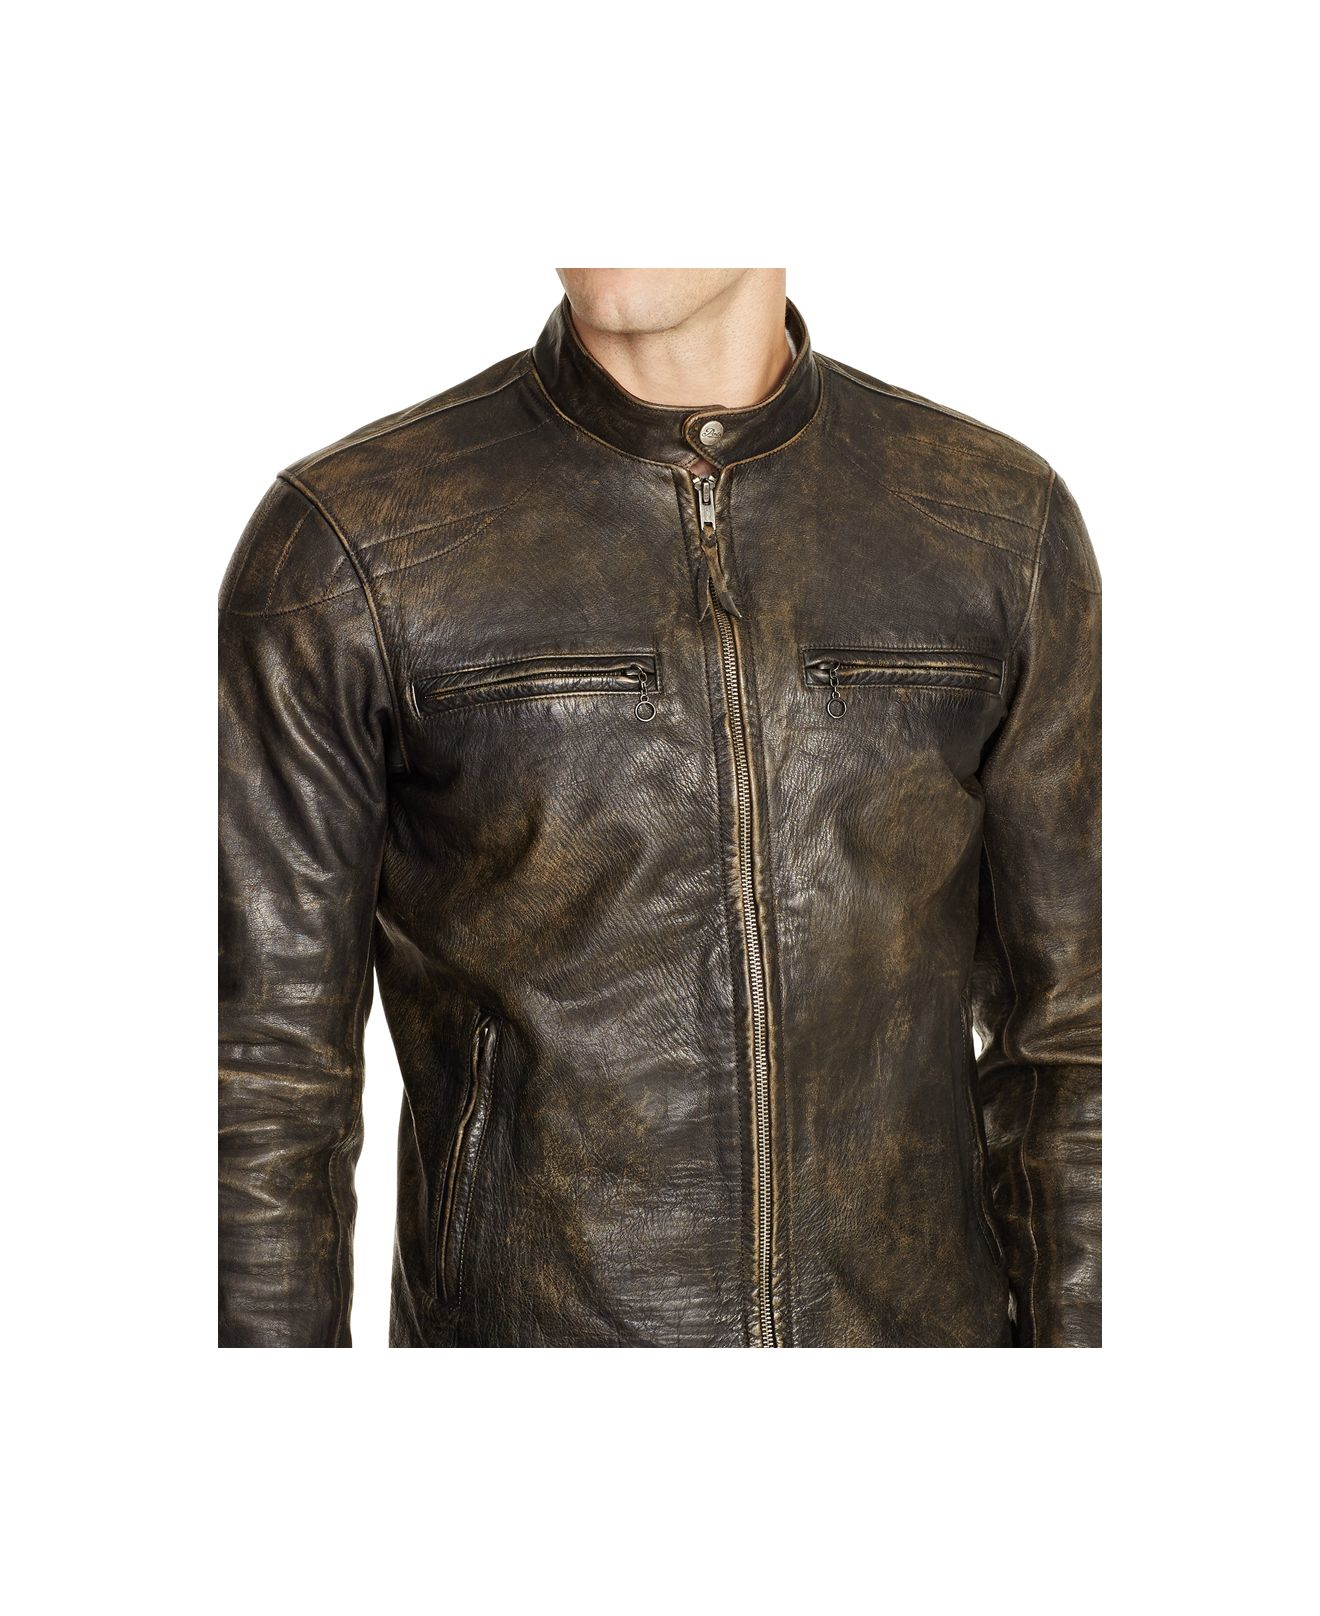 Polo Ralph Lauren Distressed Leather Jacket in Brown for Men - Lyst